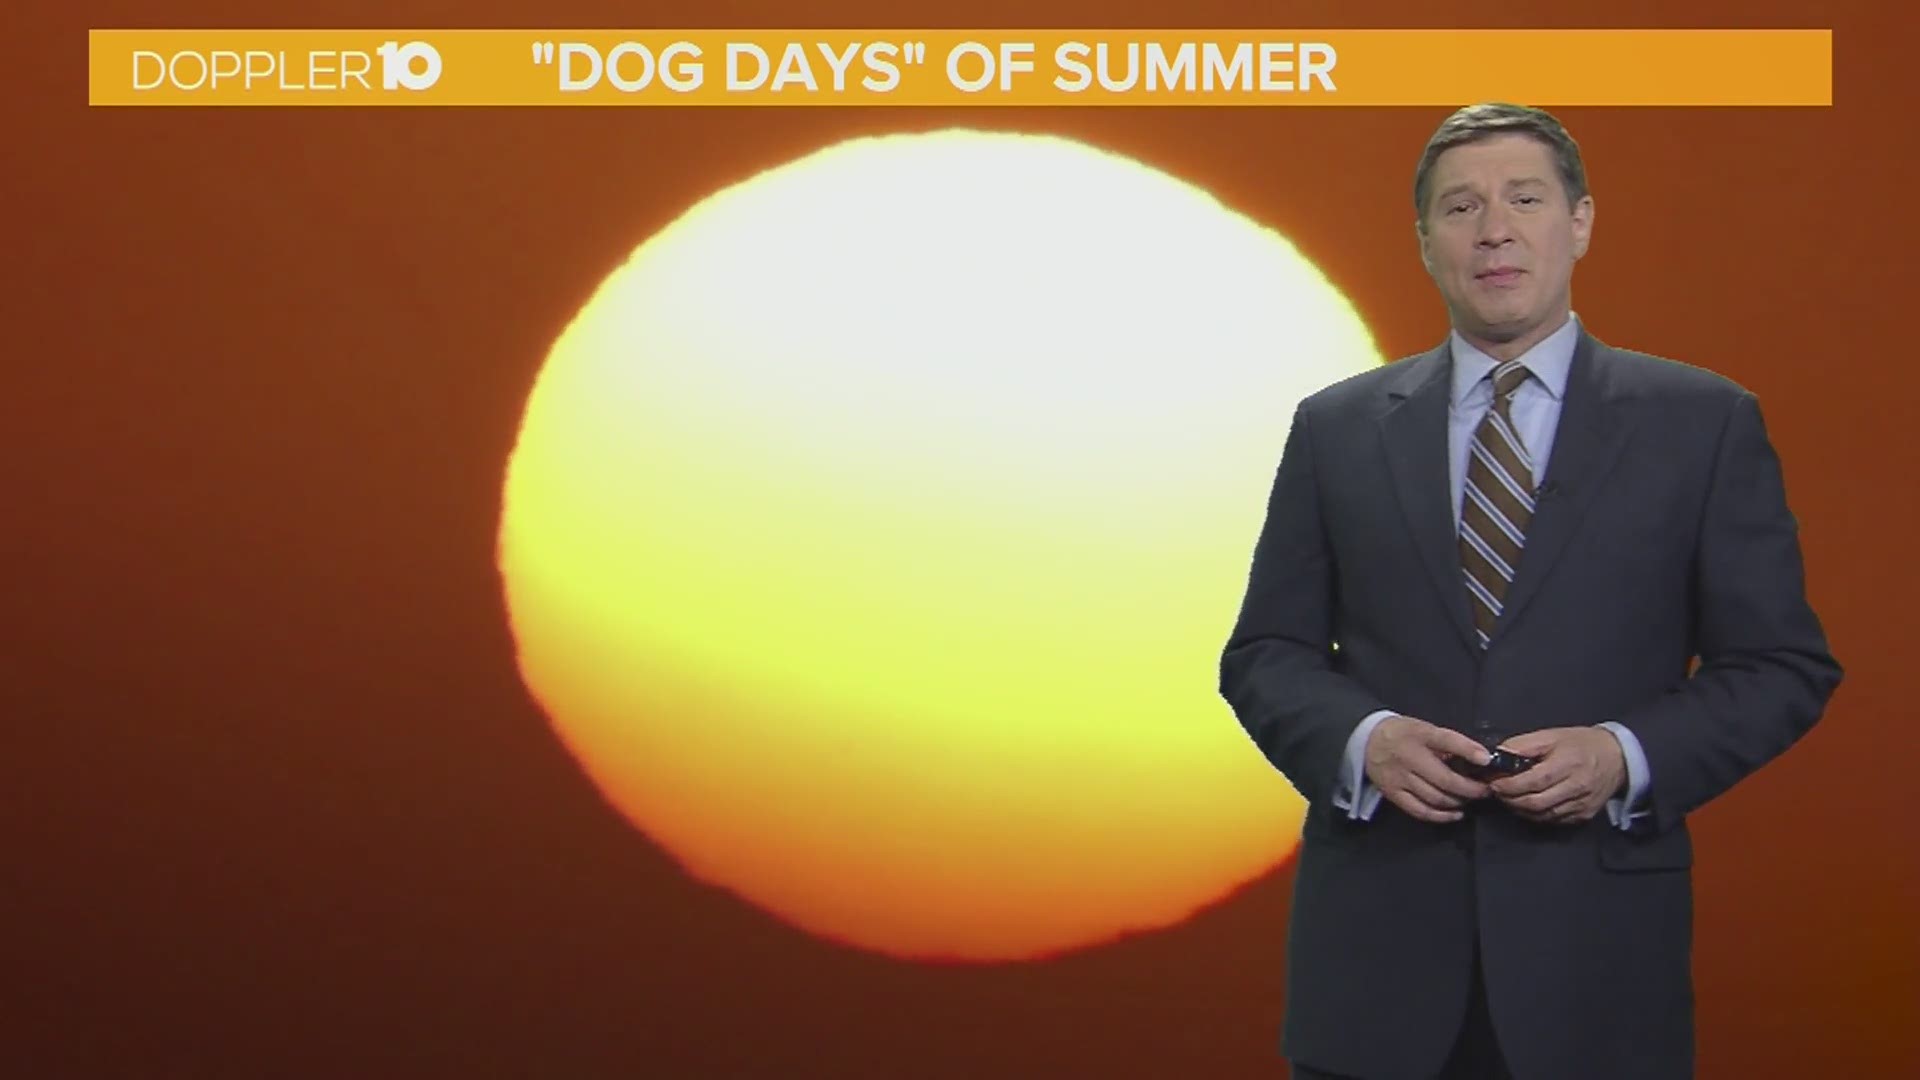 In this Doppler 10 Futurecasters lesson, meteorologist Jeff Booth explains how the "Dog Days of Summer" got its name.